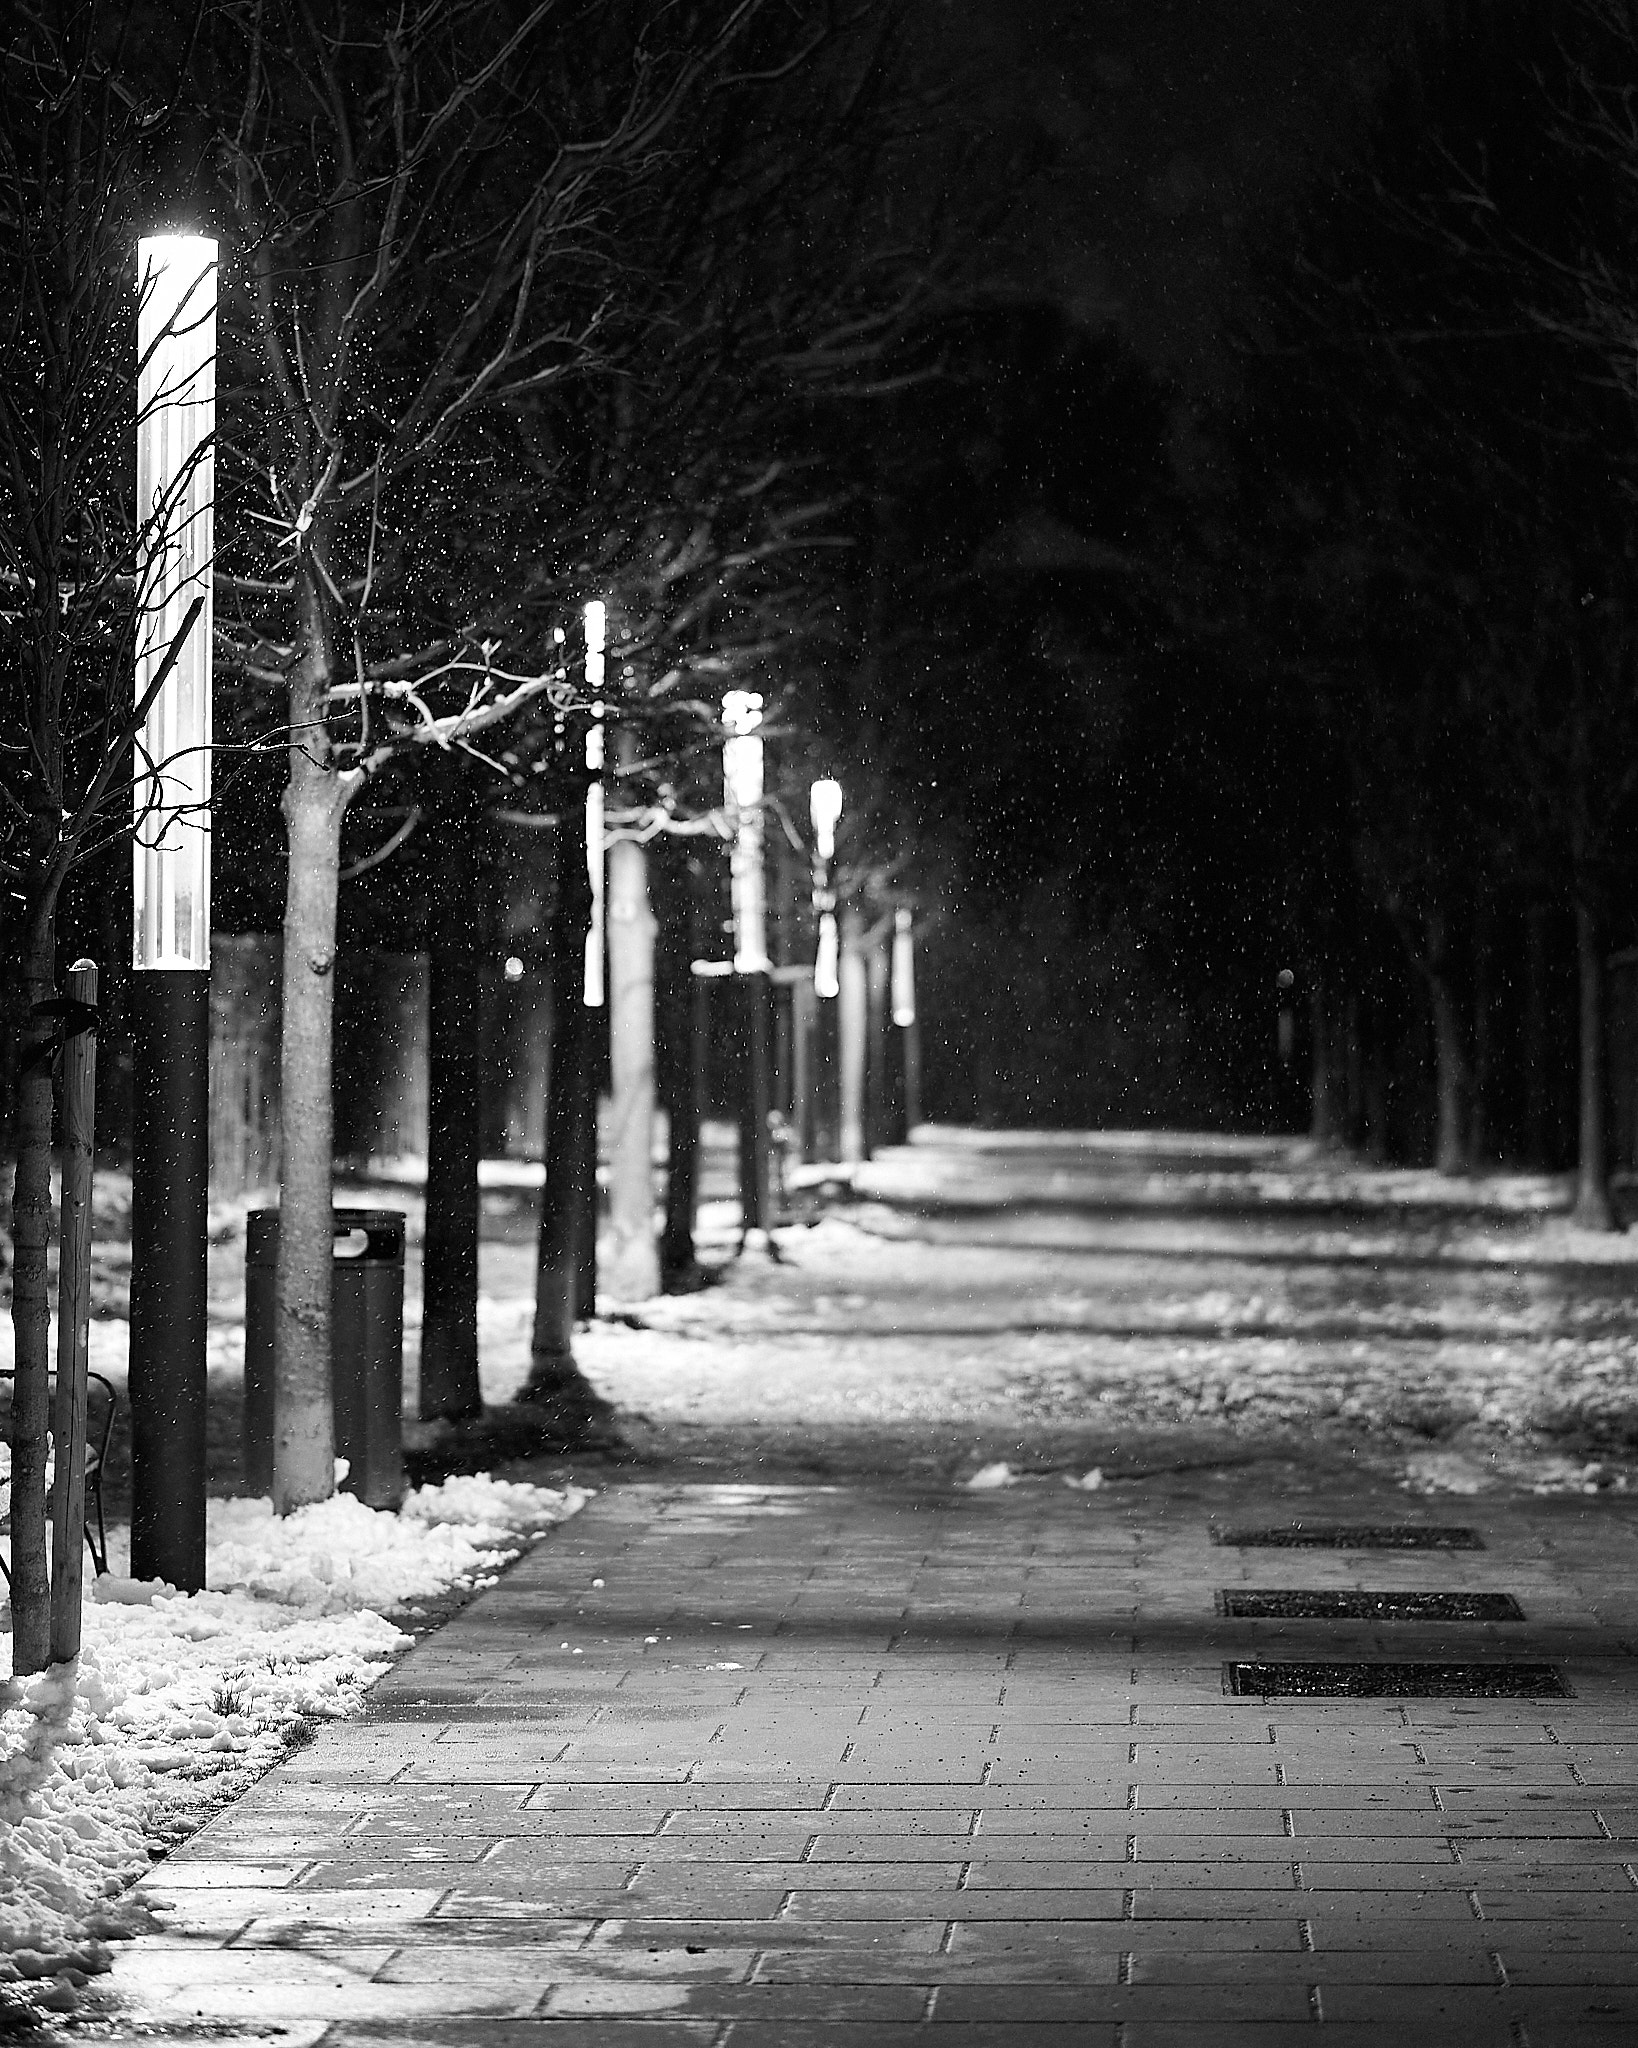 A black and white photo showcasing a snow-lined pedestrian pathway at night. The path is illuminated by a series of tall, slender street lamps casting bright light spots on the ground. Snowflakes are visible in the air, 